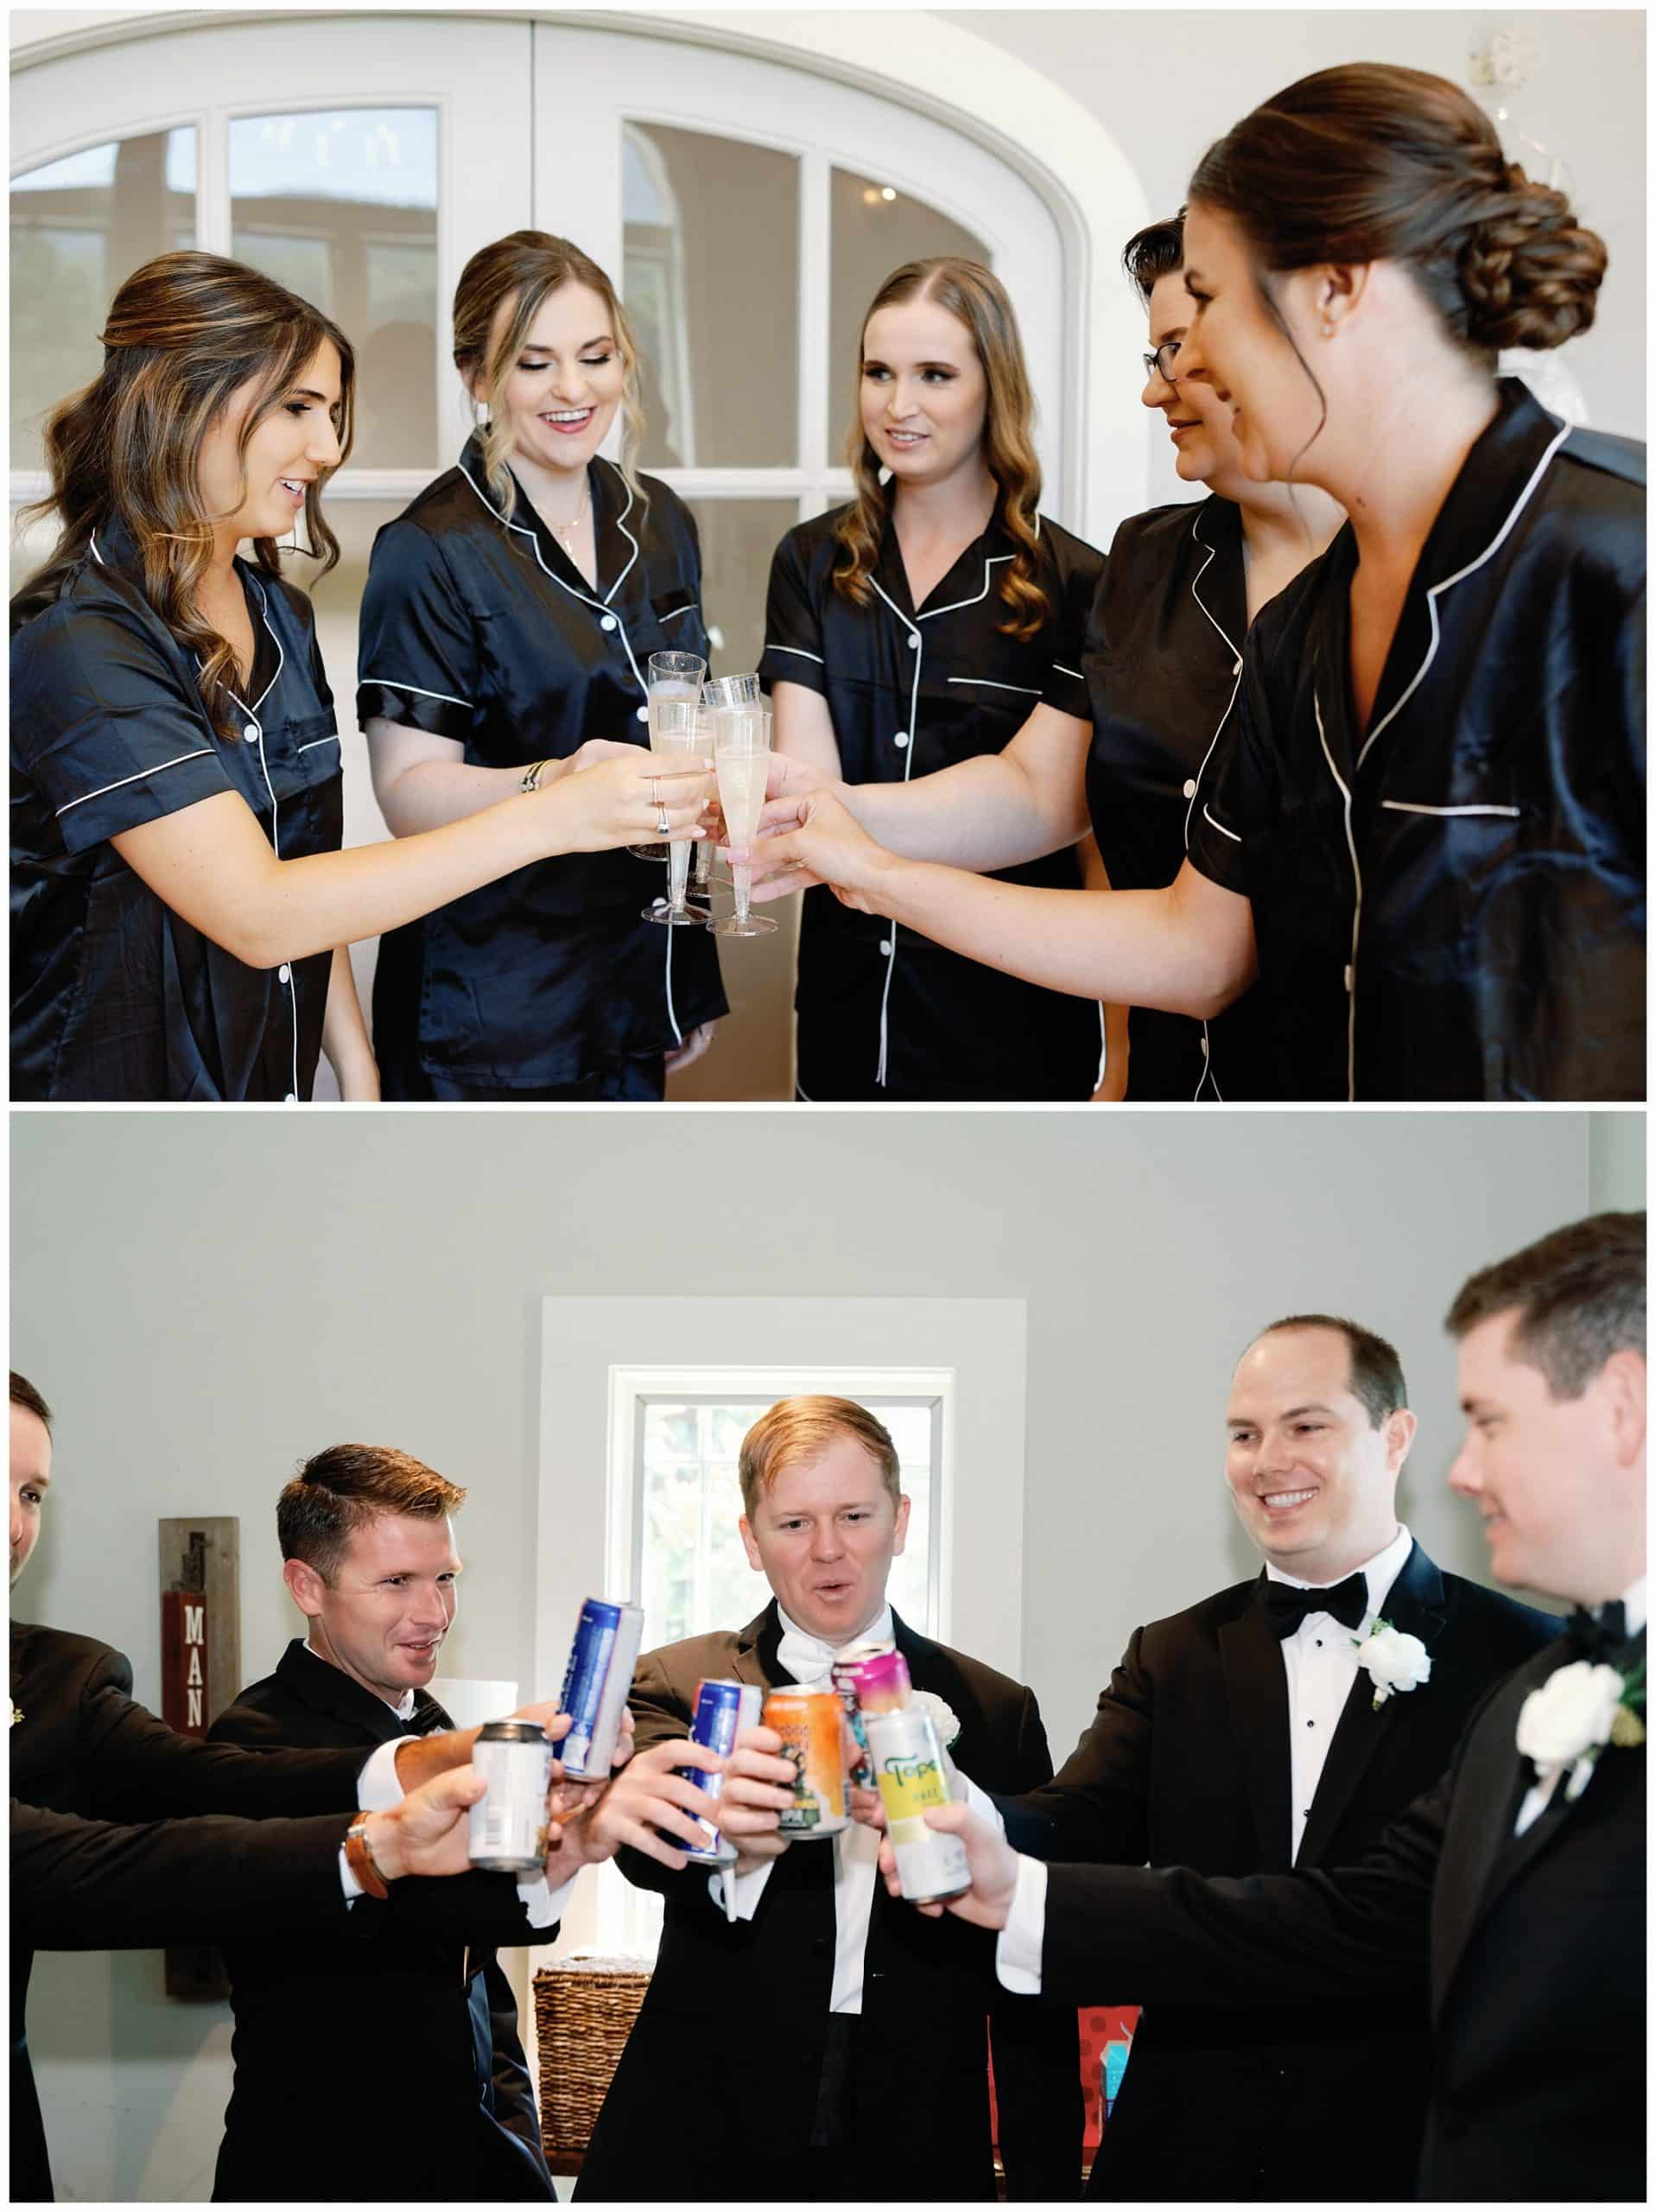 A group of groomsmen toasting champagne at a wedding.